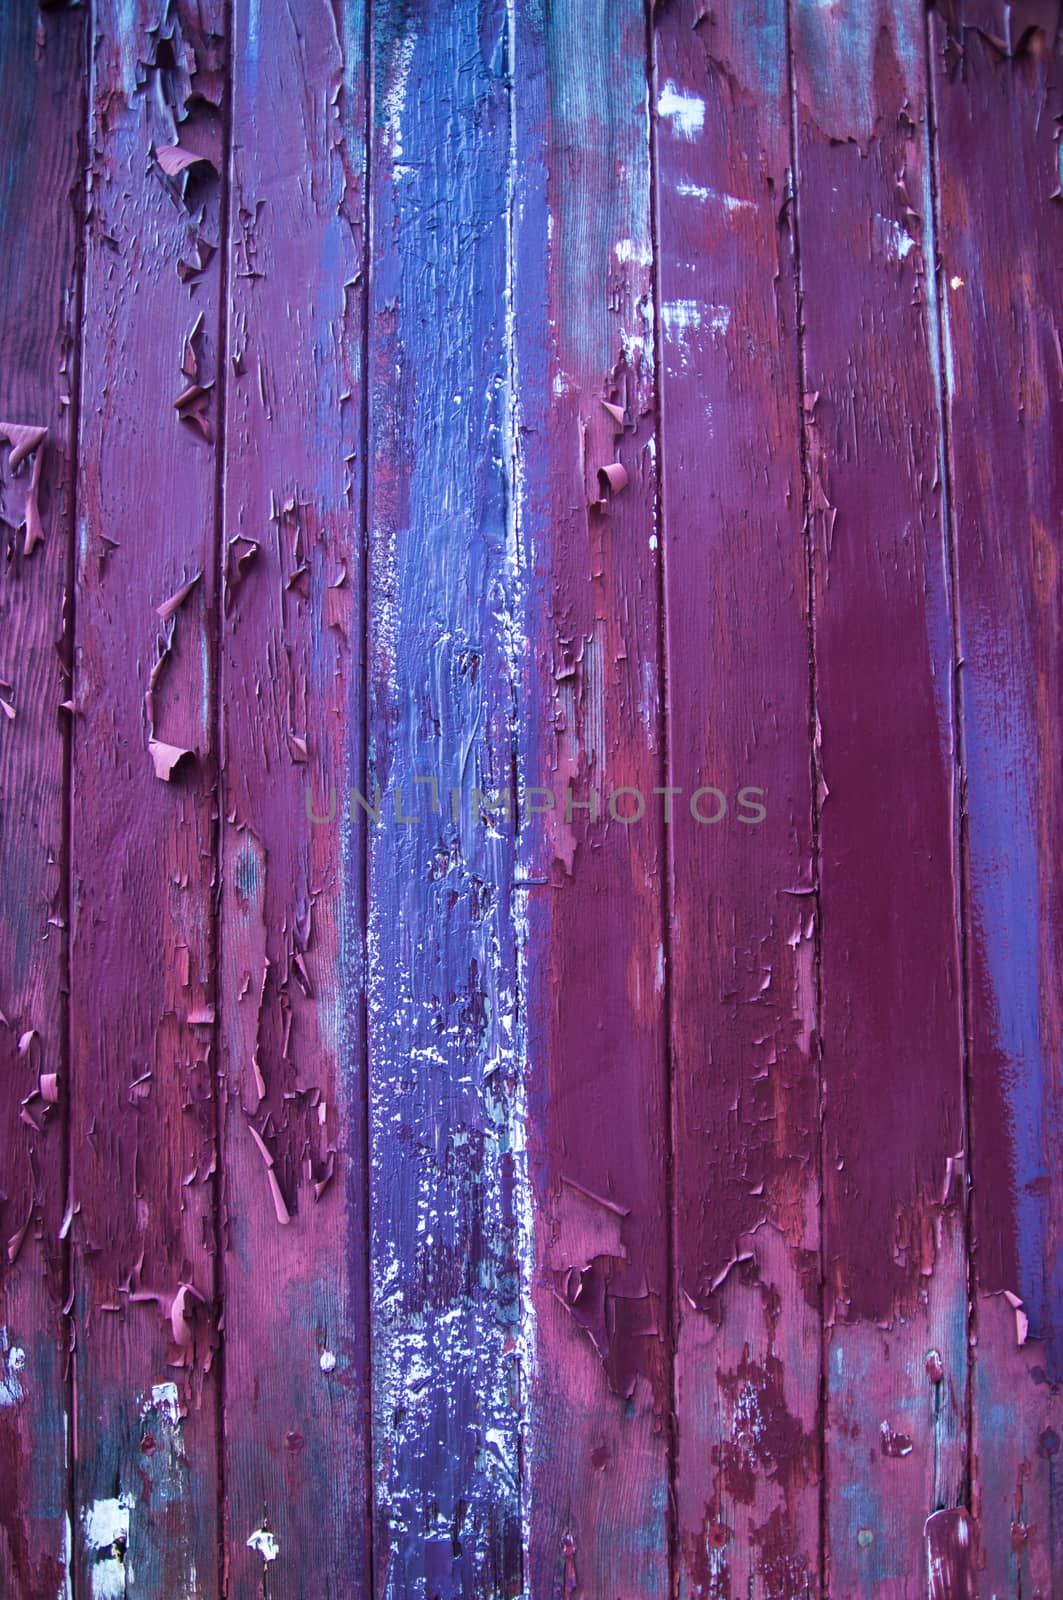 Flaking paint of purple and blue on wood by emattil